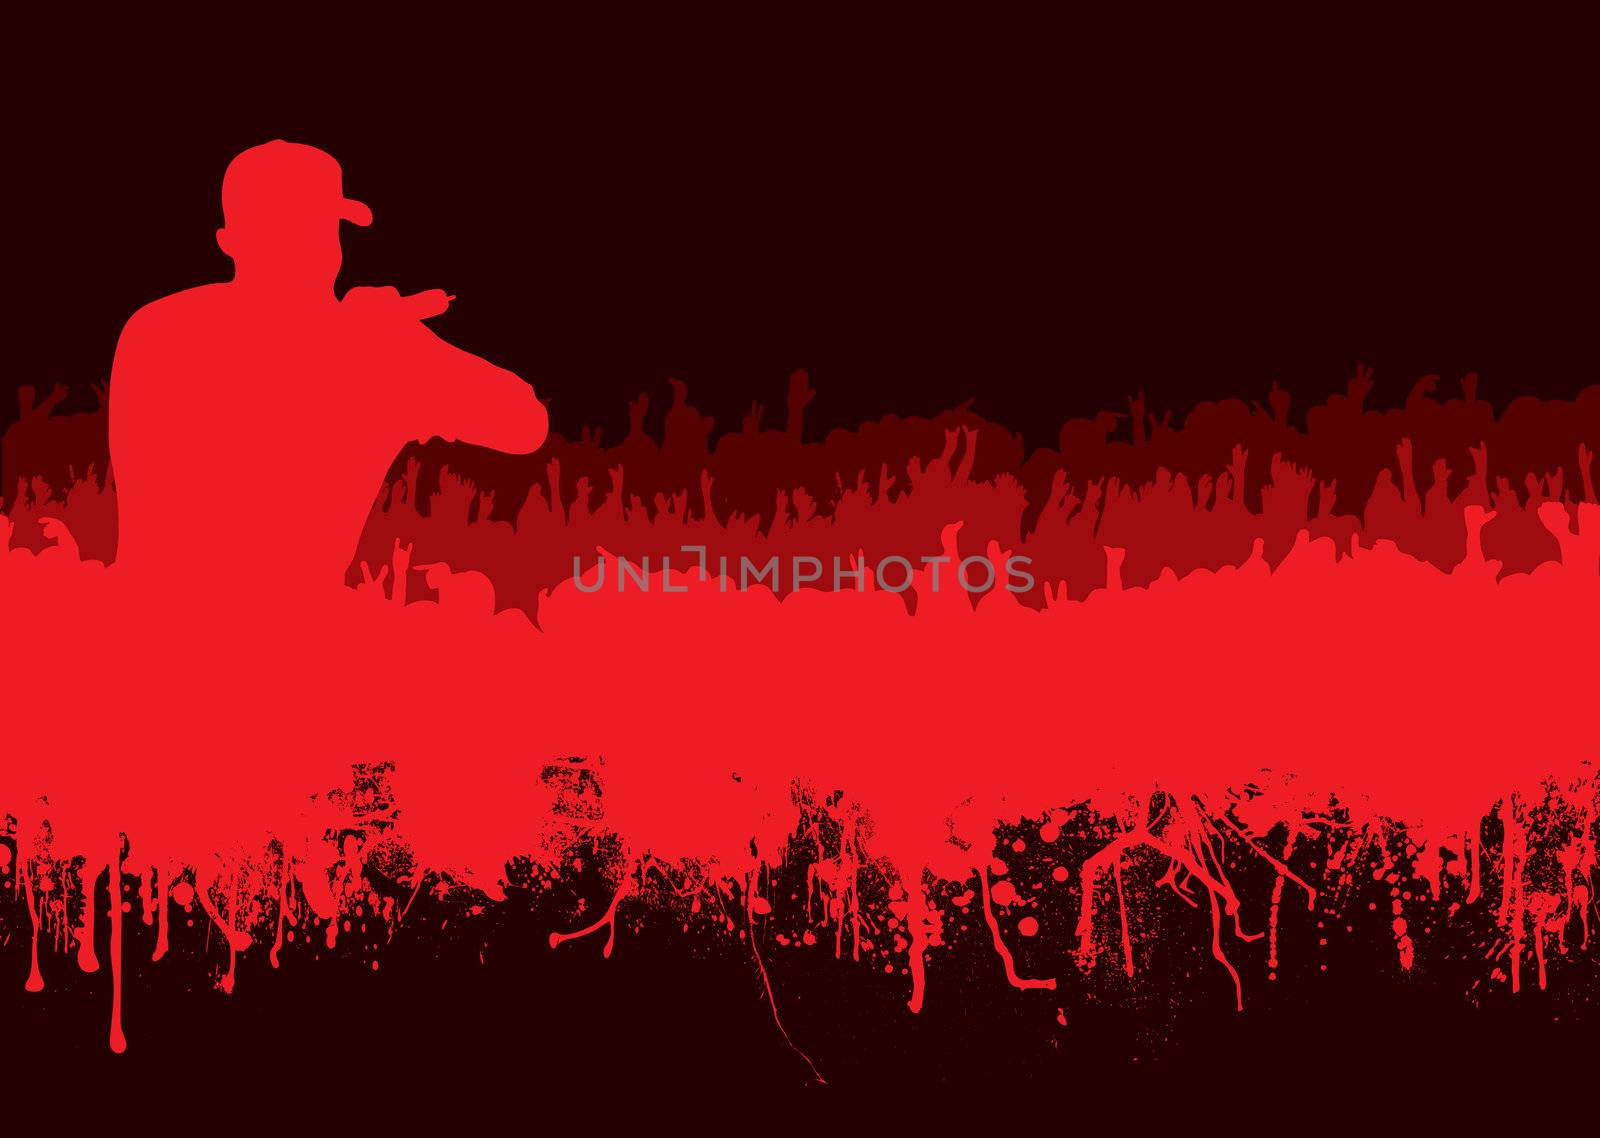 Rock or music concert crowd in silhouette with grunge ink blood effect